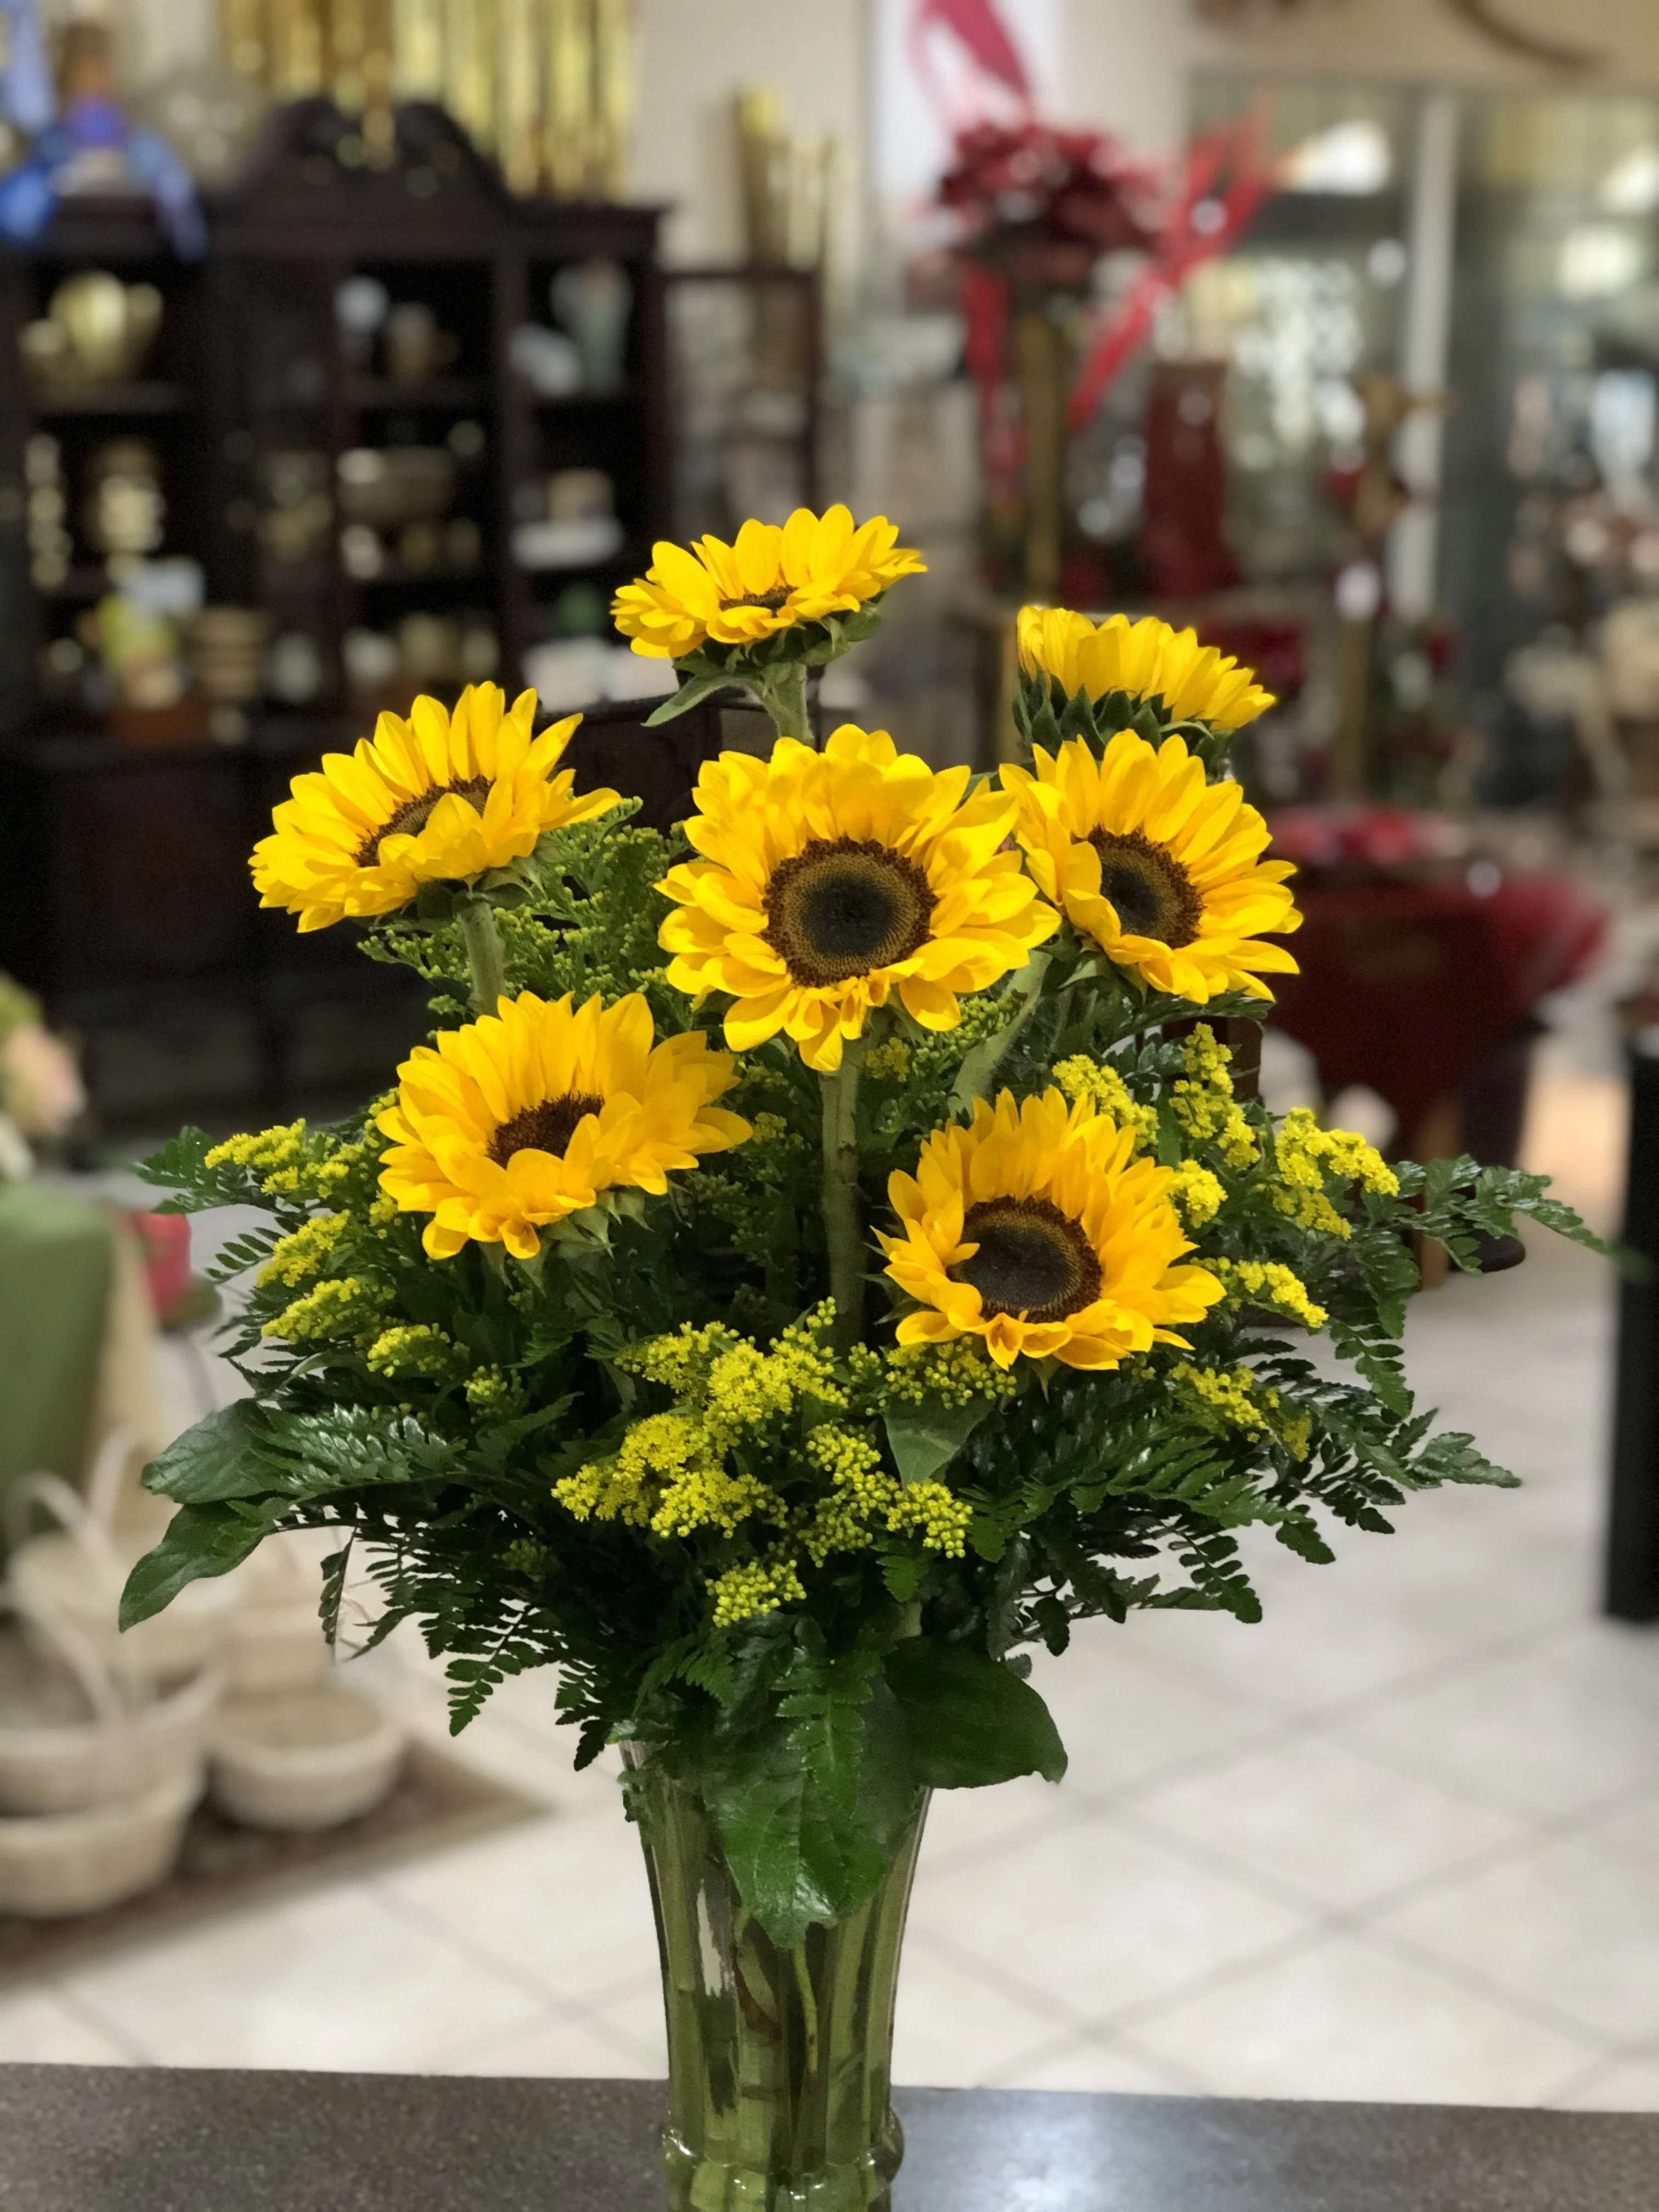 Vincent Van Gogh Vase Sunflowers - A beautiful vase of glorious sunflowers that is sure to do Vincent Van Gogh proud. Vases vary upon availability.